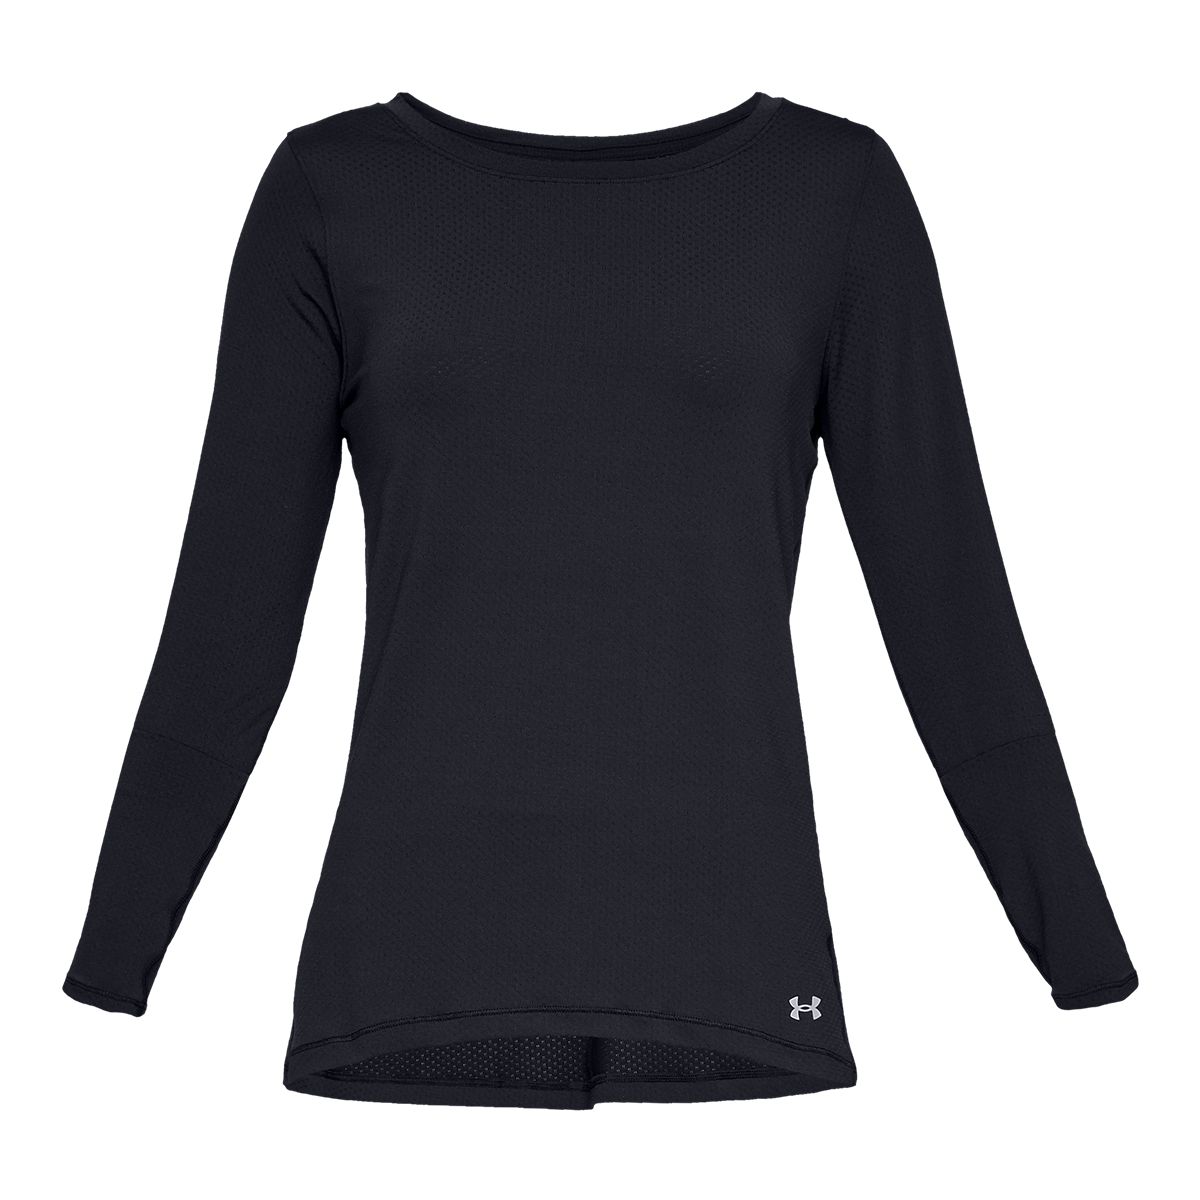 Under Armour Women's Outdoor Long Sleeve Shirt, Loose Fit, Quick